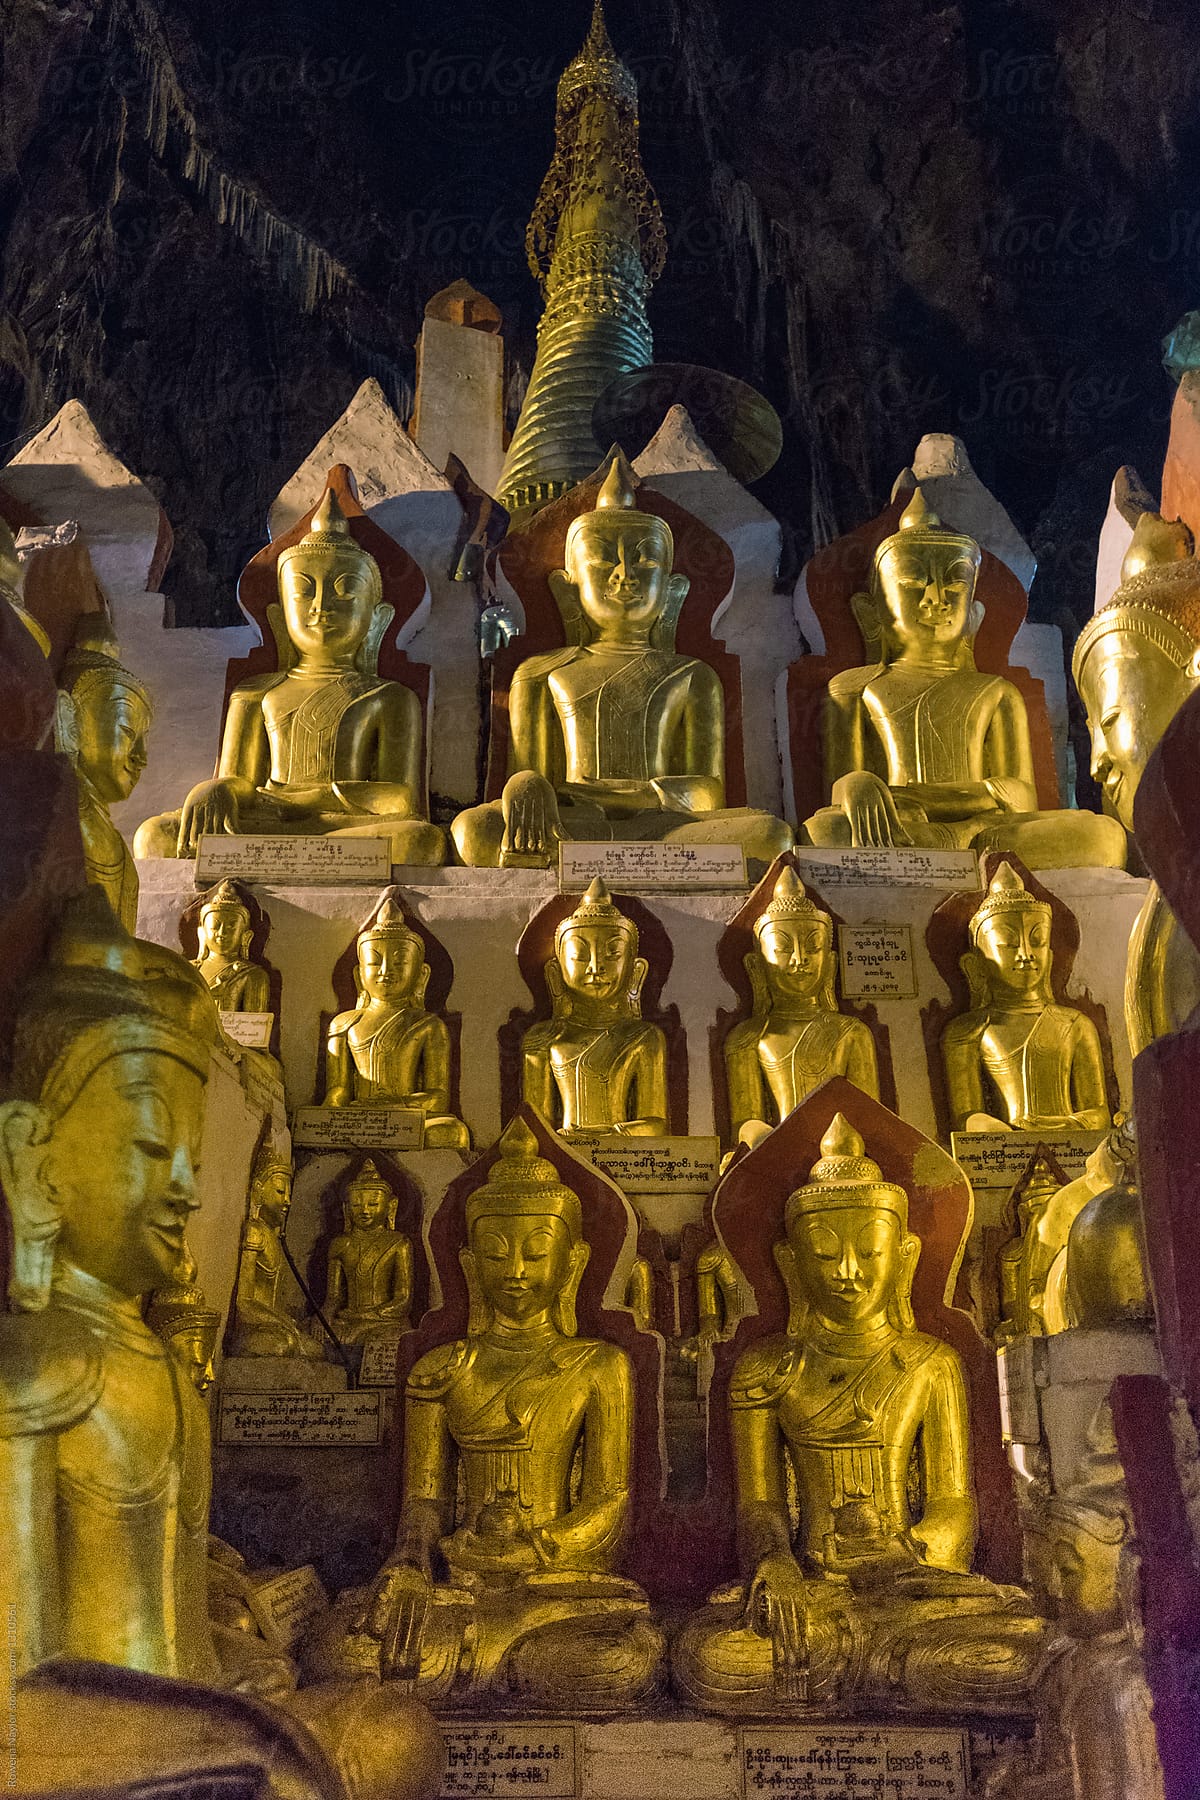 Some of the 8,000 Buddhas in the Pindaya Cave, Myanmar